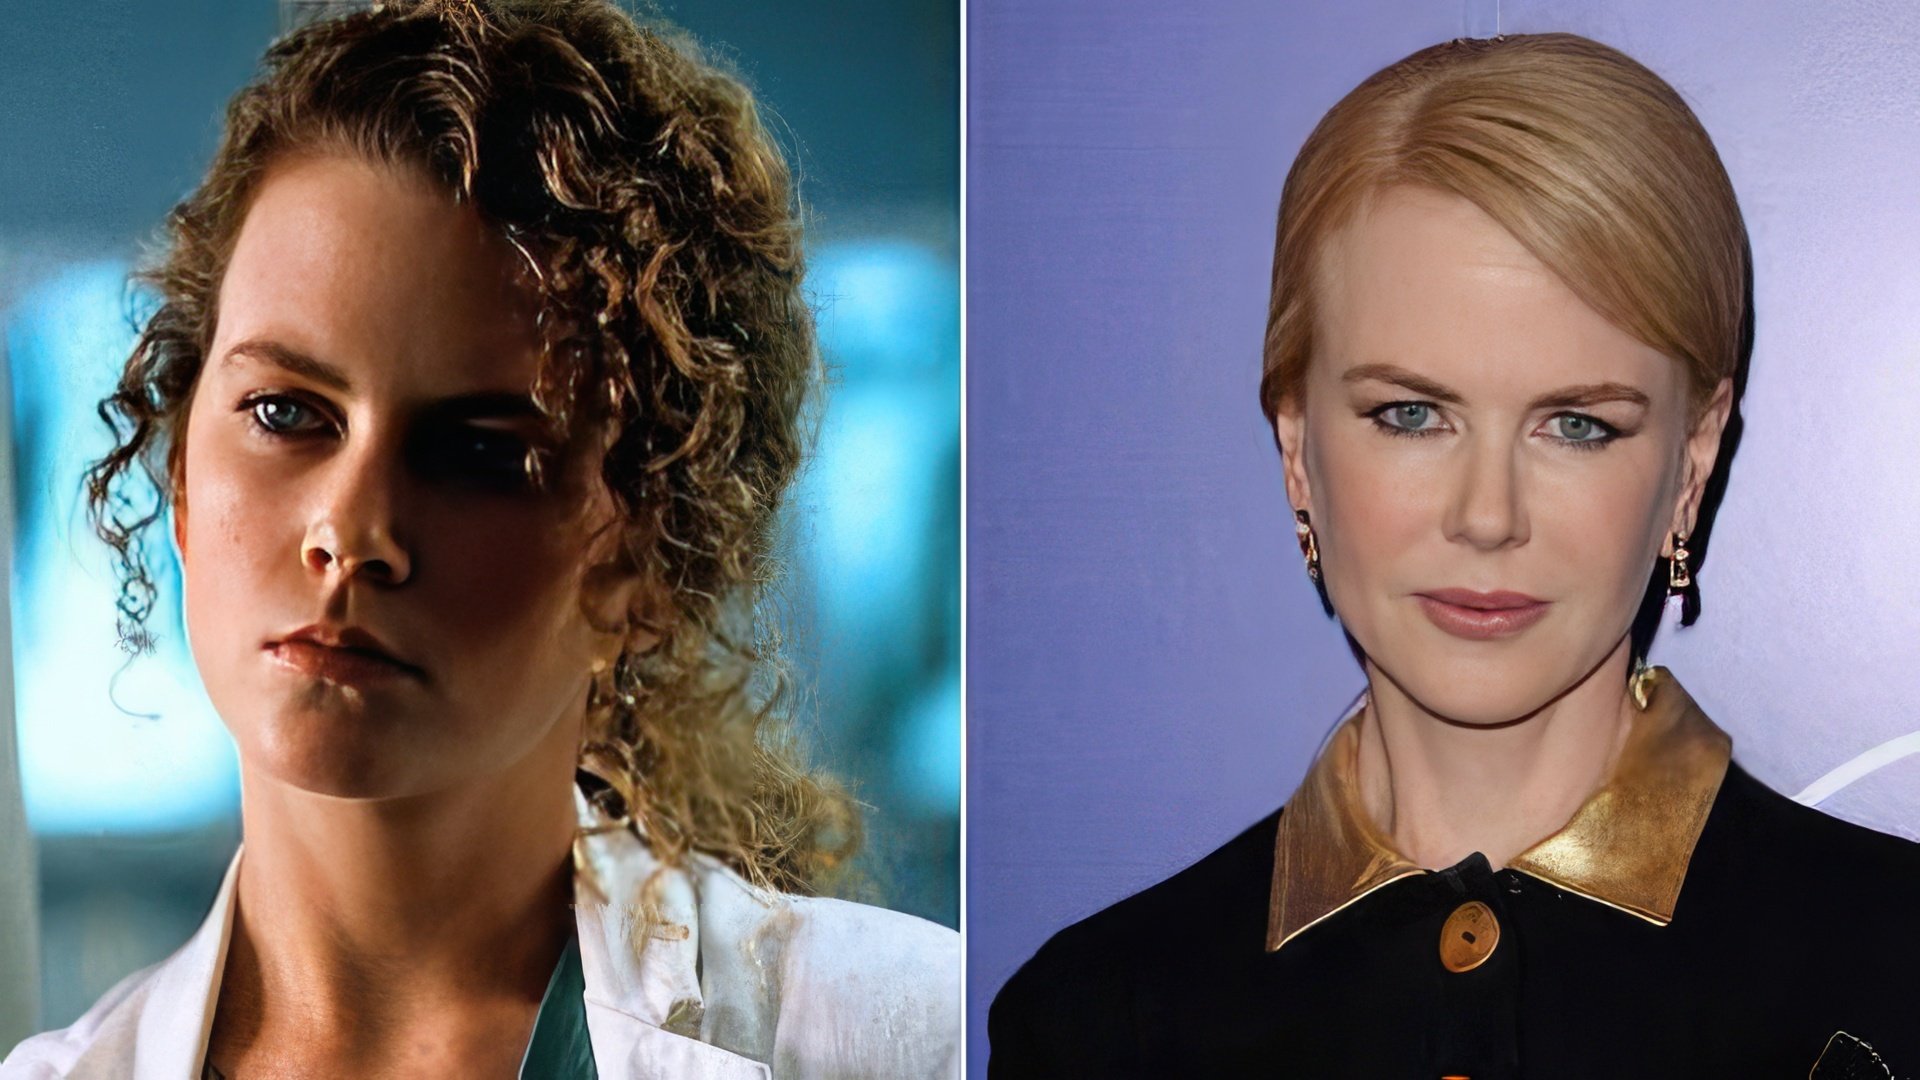 Kidman received a record salary of $200 thousand for her role of Dr. Claire Lewicki